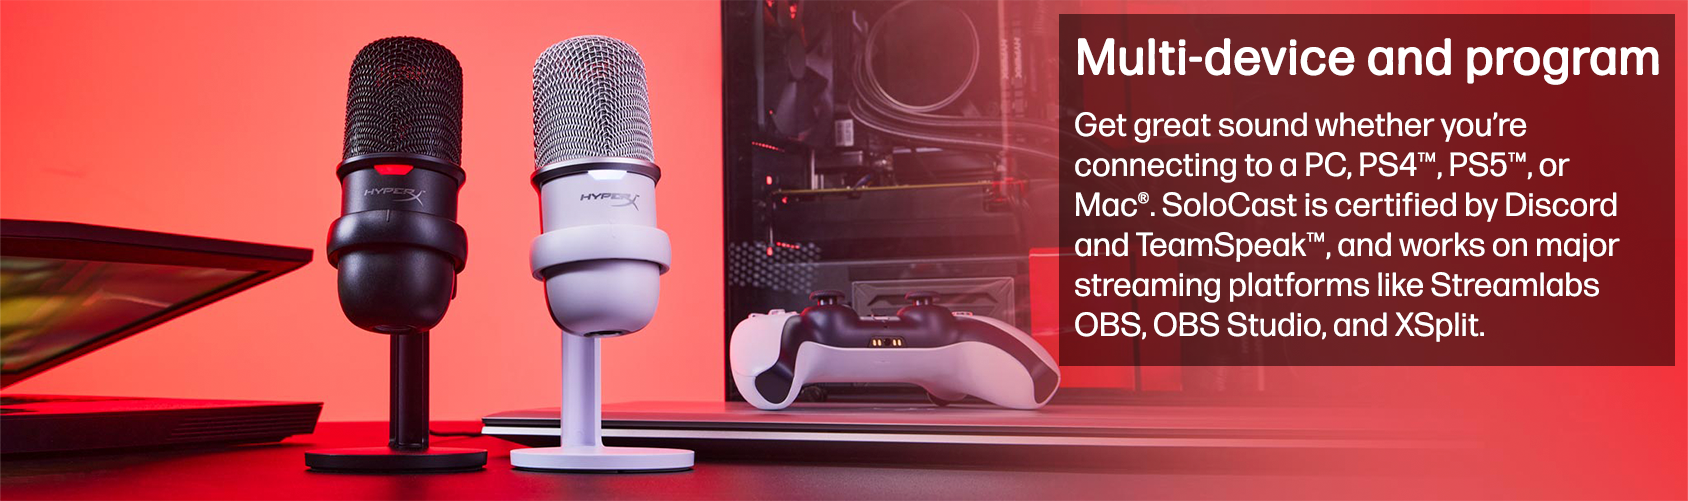 HyperX SoloCast USB gaming microphone prioritizes audio close up and not  background noises » Gadget Flow